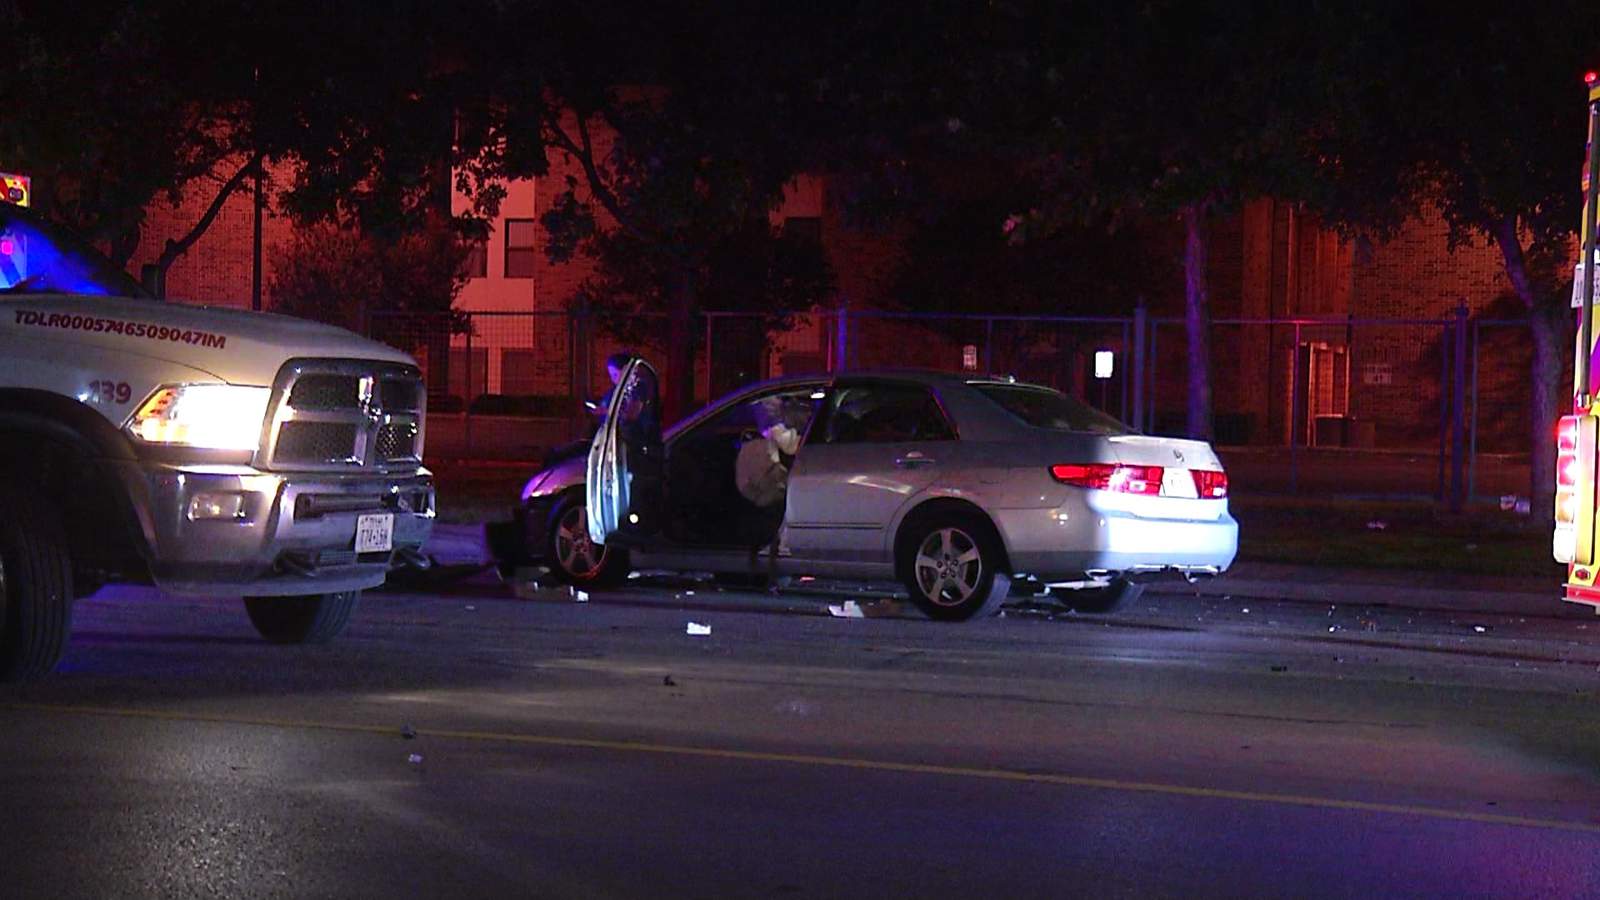 Late-night crash sends vehicle through fence, police say